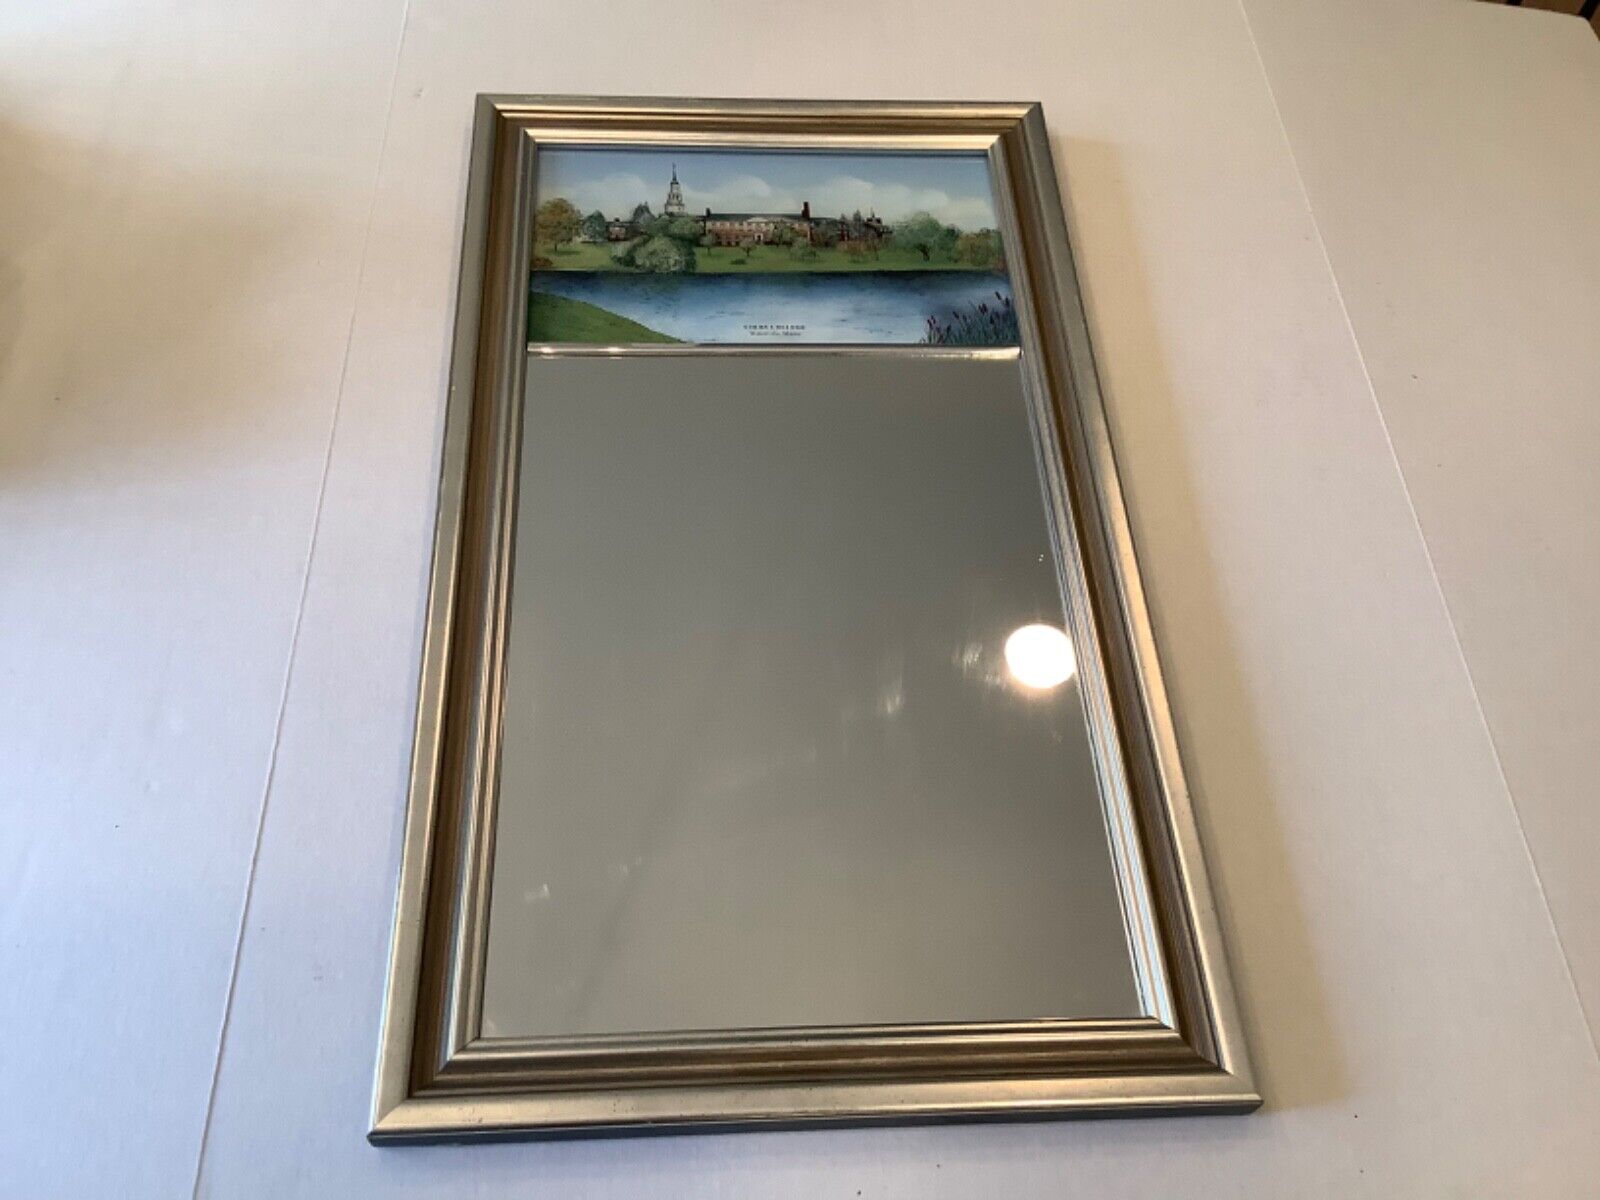 COLBY COLLEGE WATERVILLE ME Mirror. Made By Eglomise Designs of Boston. Preowned